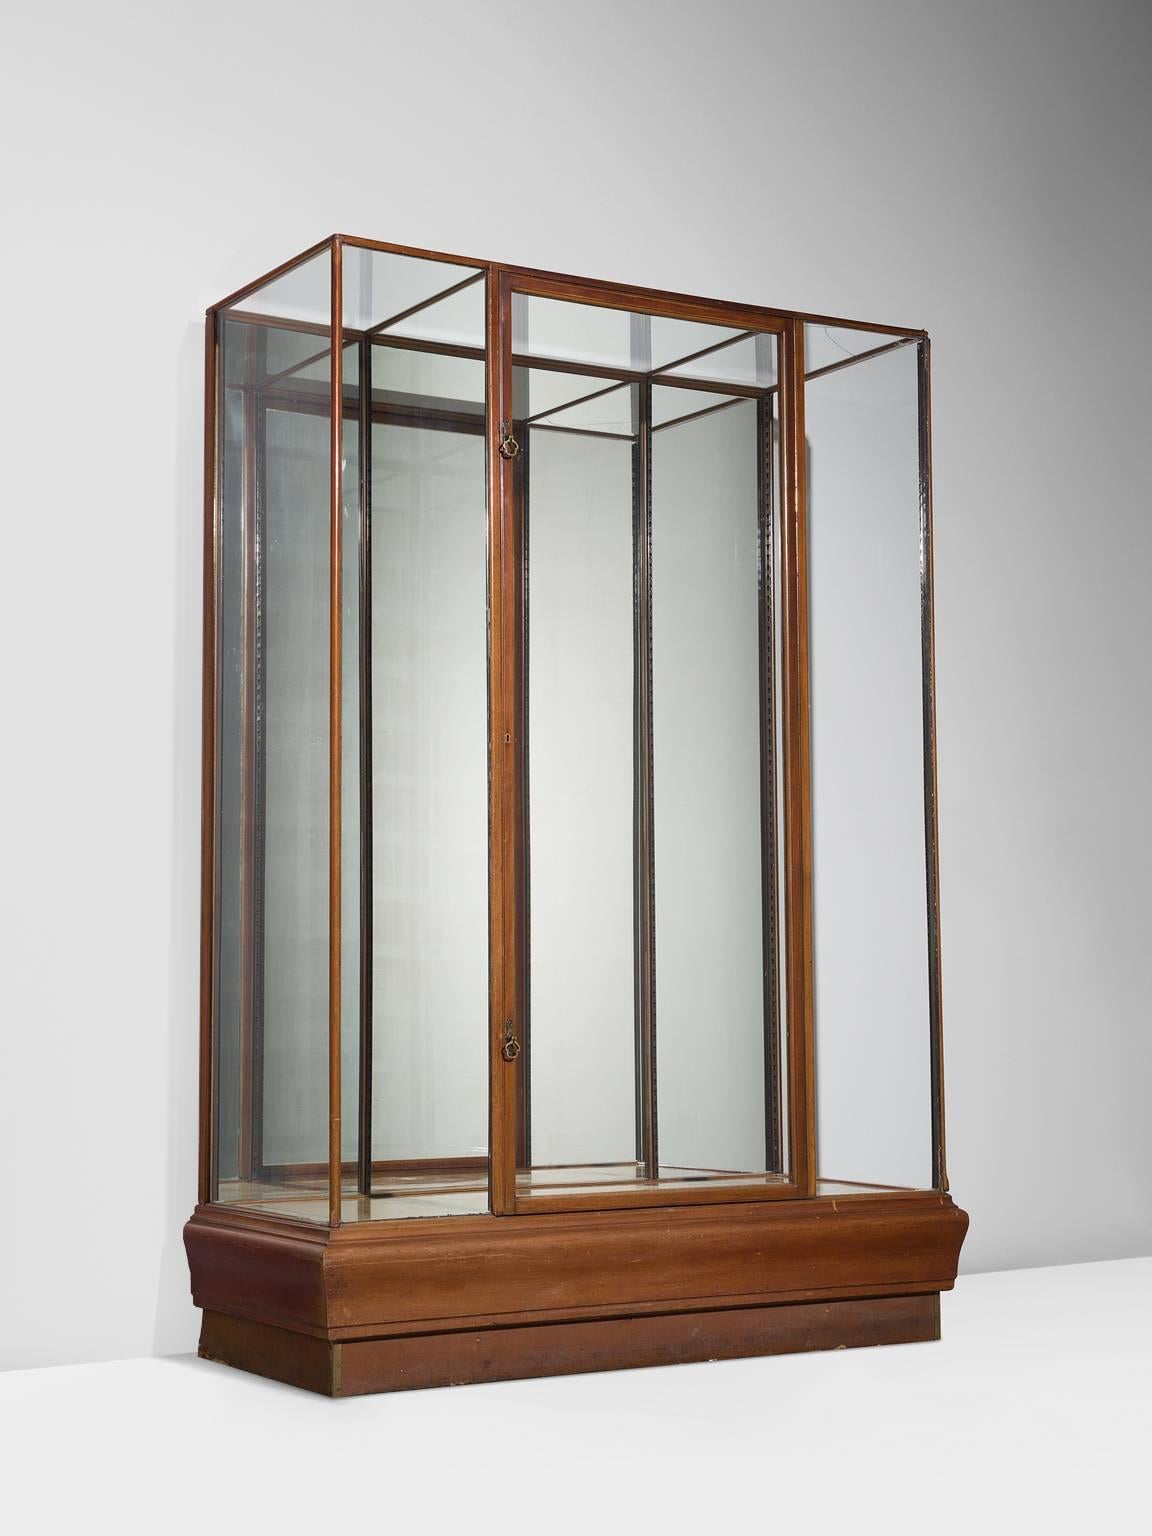 Vitrine, wood, glass, steel, Europe, 1960s.

Sturdy and minimalist showcase in glass and wood. The base of this vitrine is beautifully simply designed as it features a wooden foot that is built up of two layers of which the top one is slightly